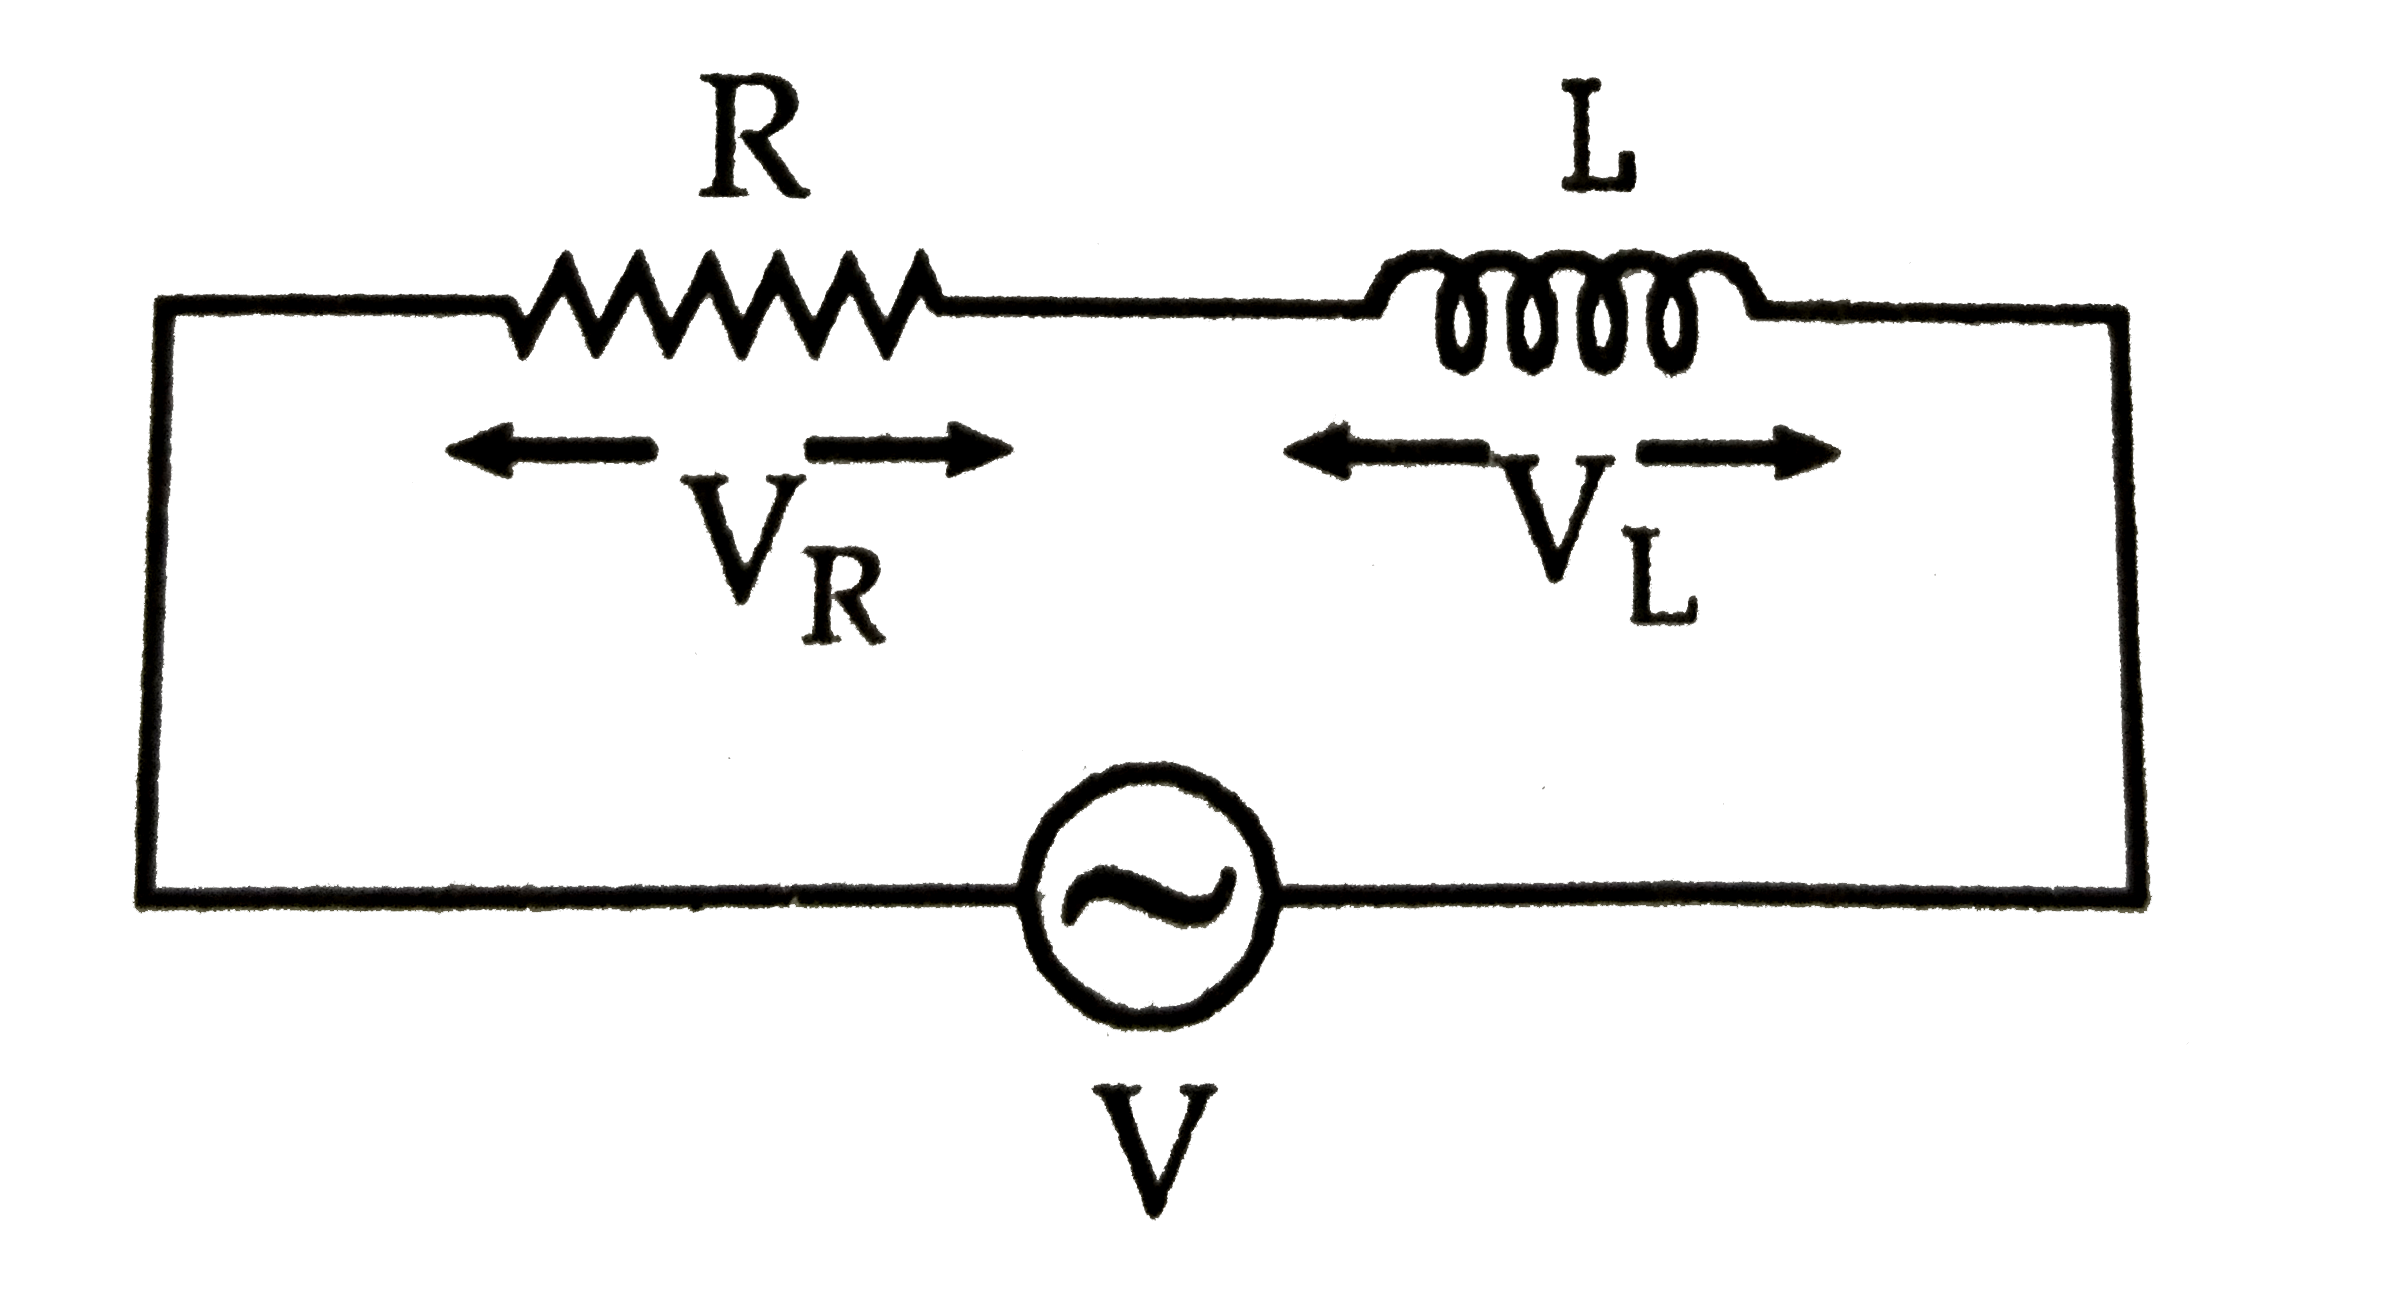 Which graph gives the correct relation between Z and f for the given R-C circuit?